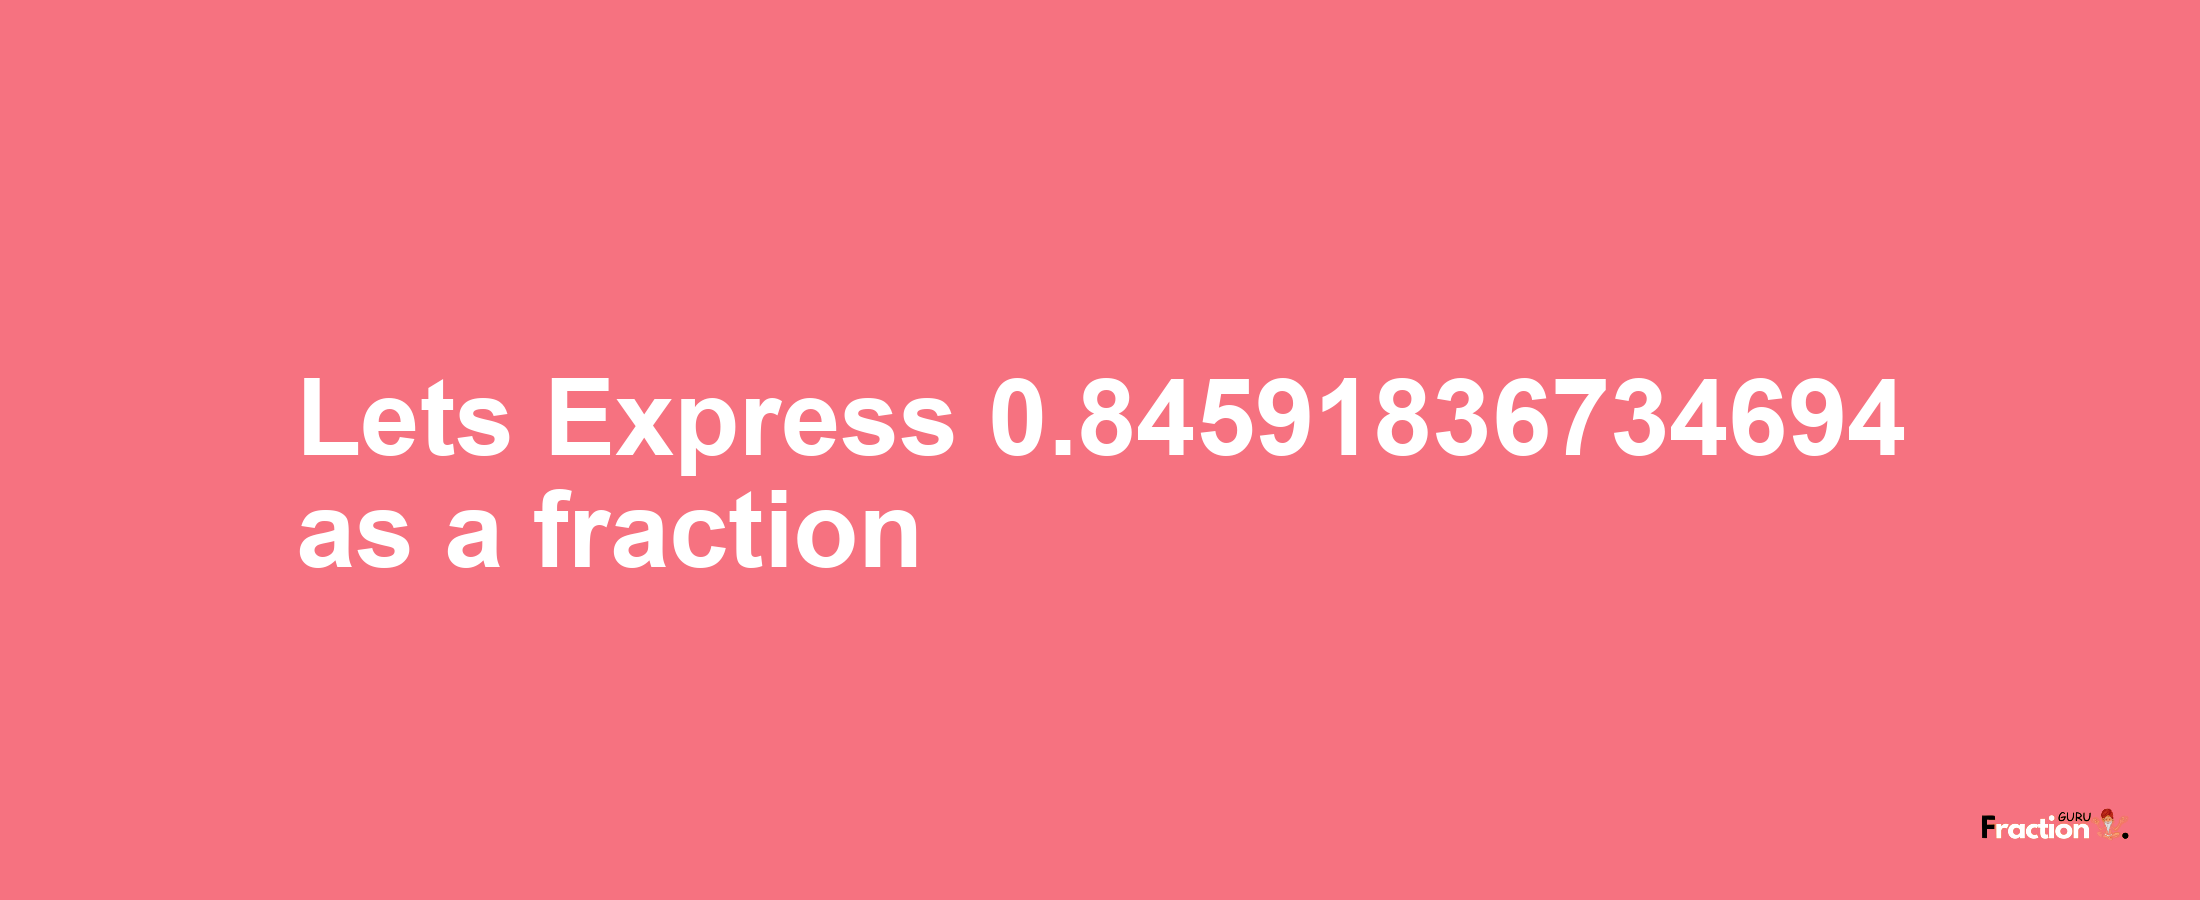 Lets Express 0.84591836734694 as afraction